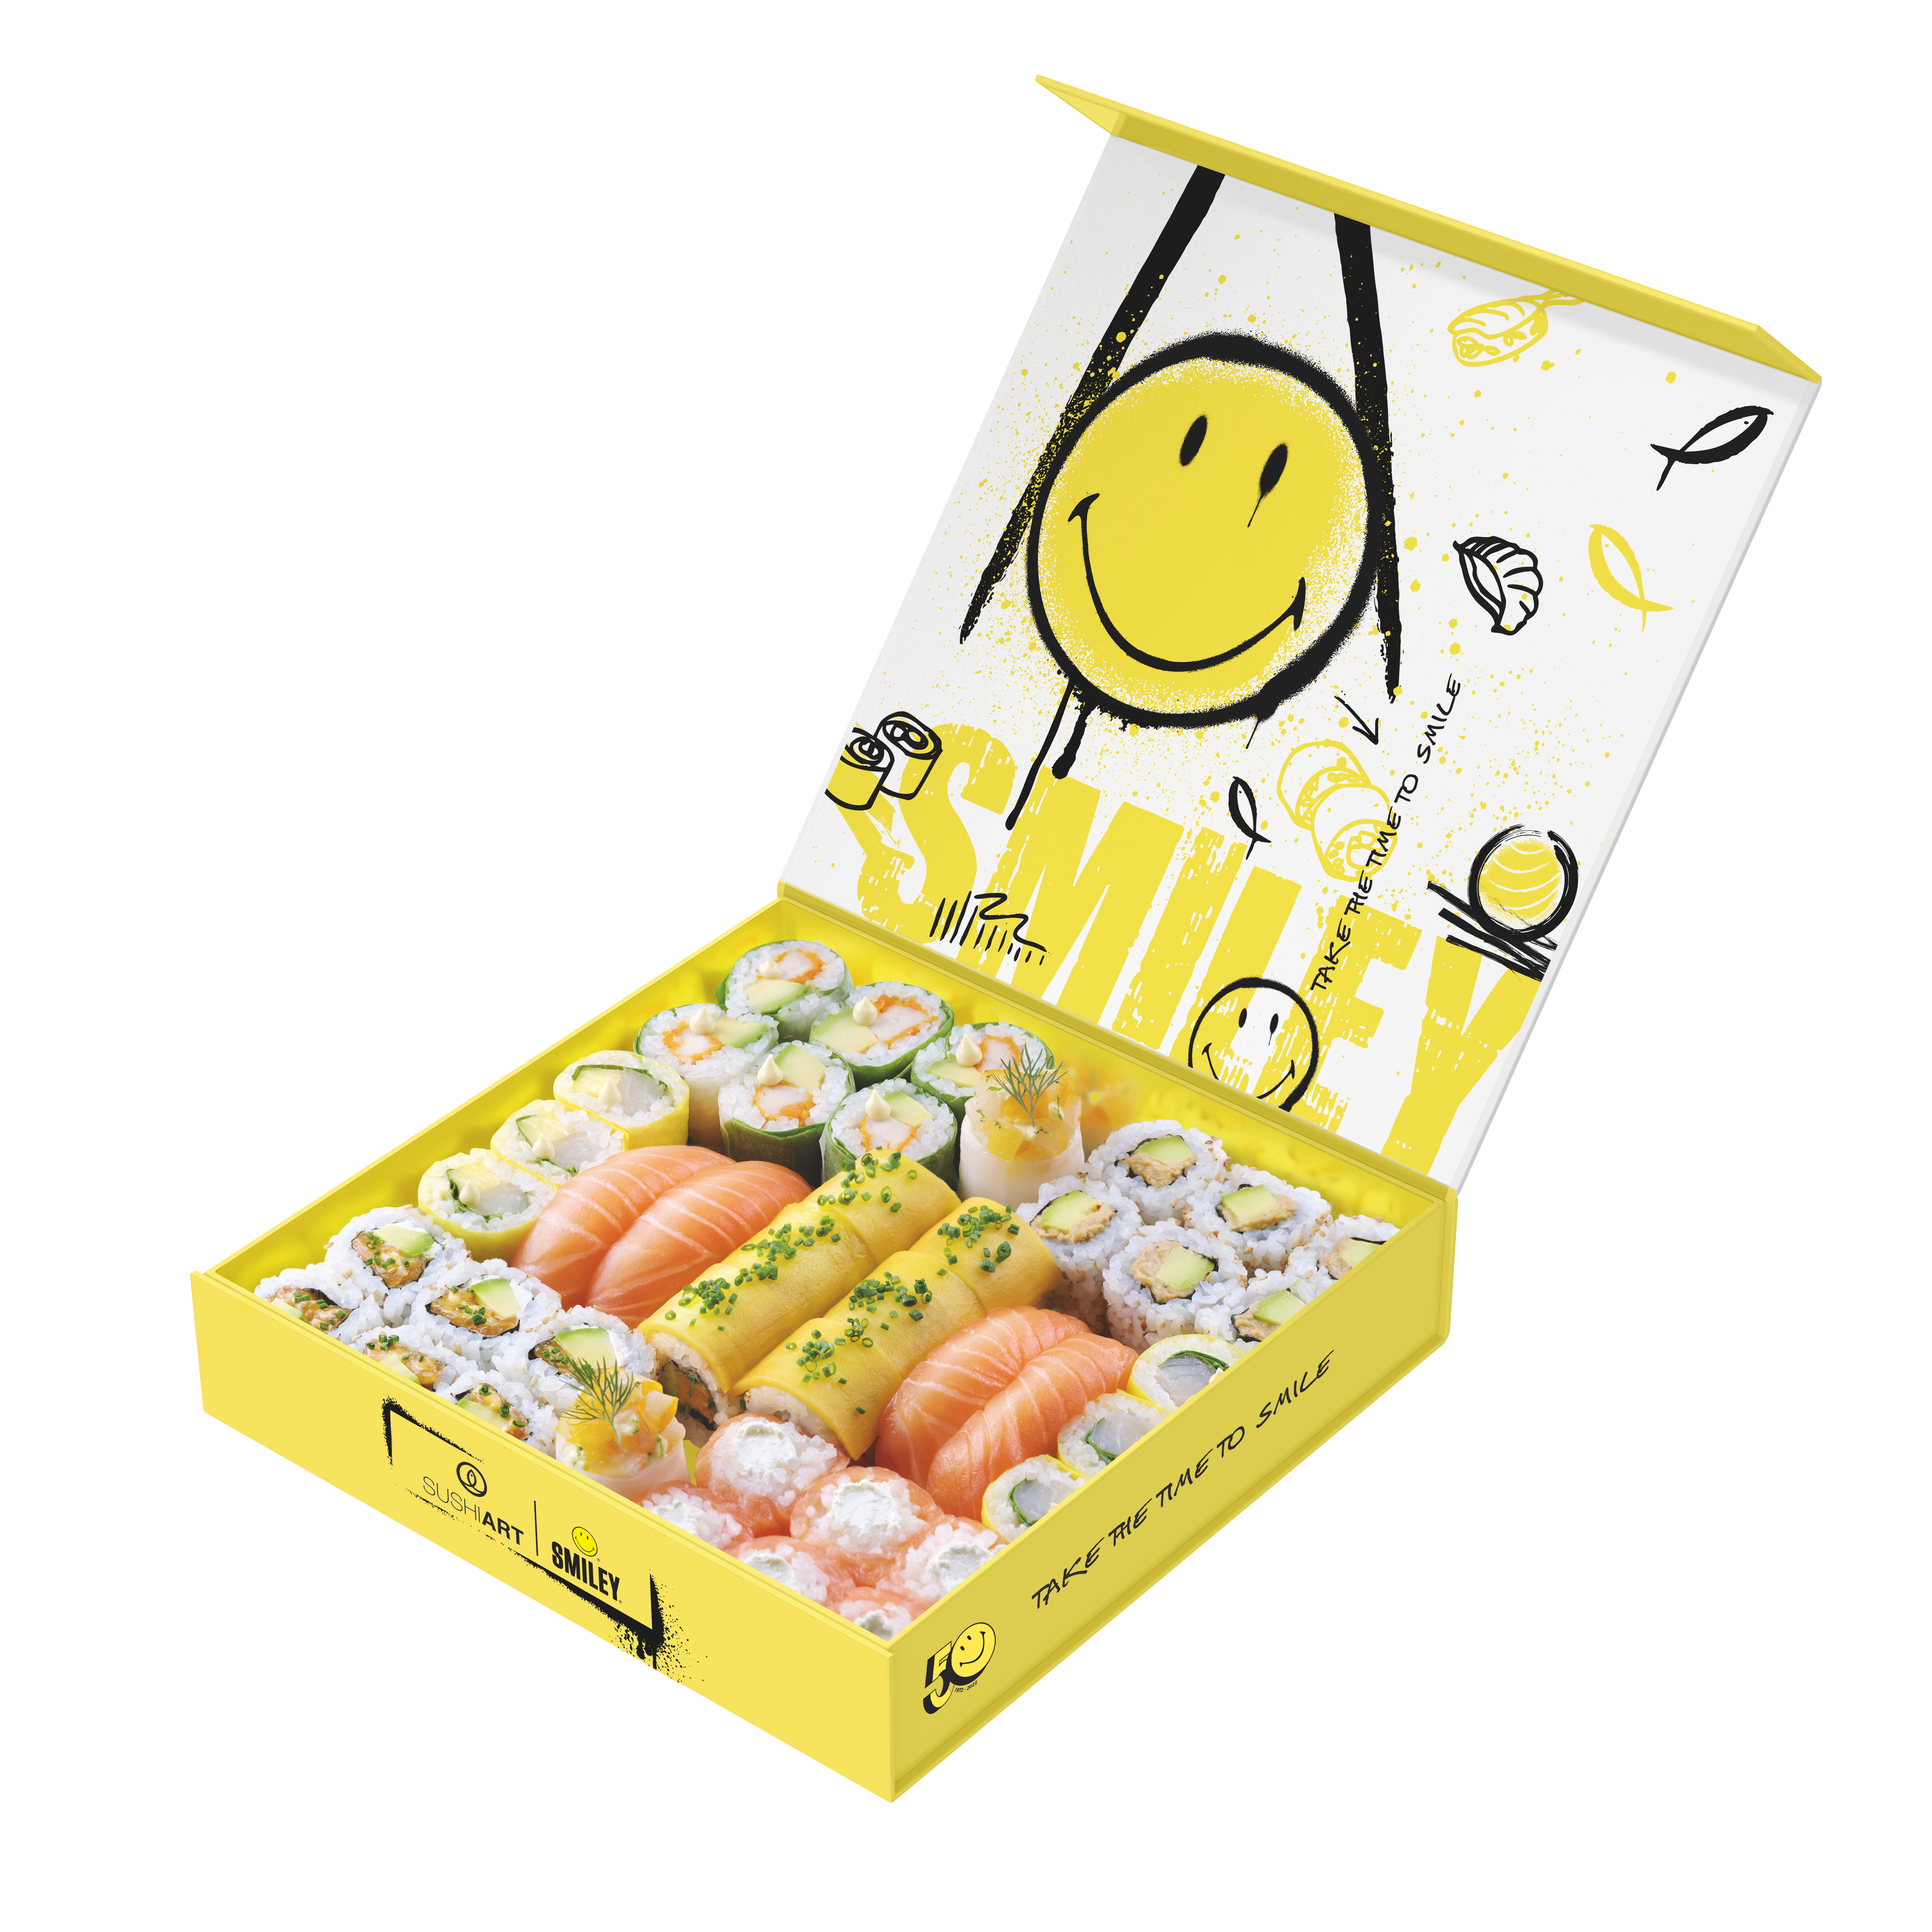 Limited-Edition SushiArt Box Now Available 